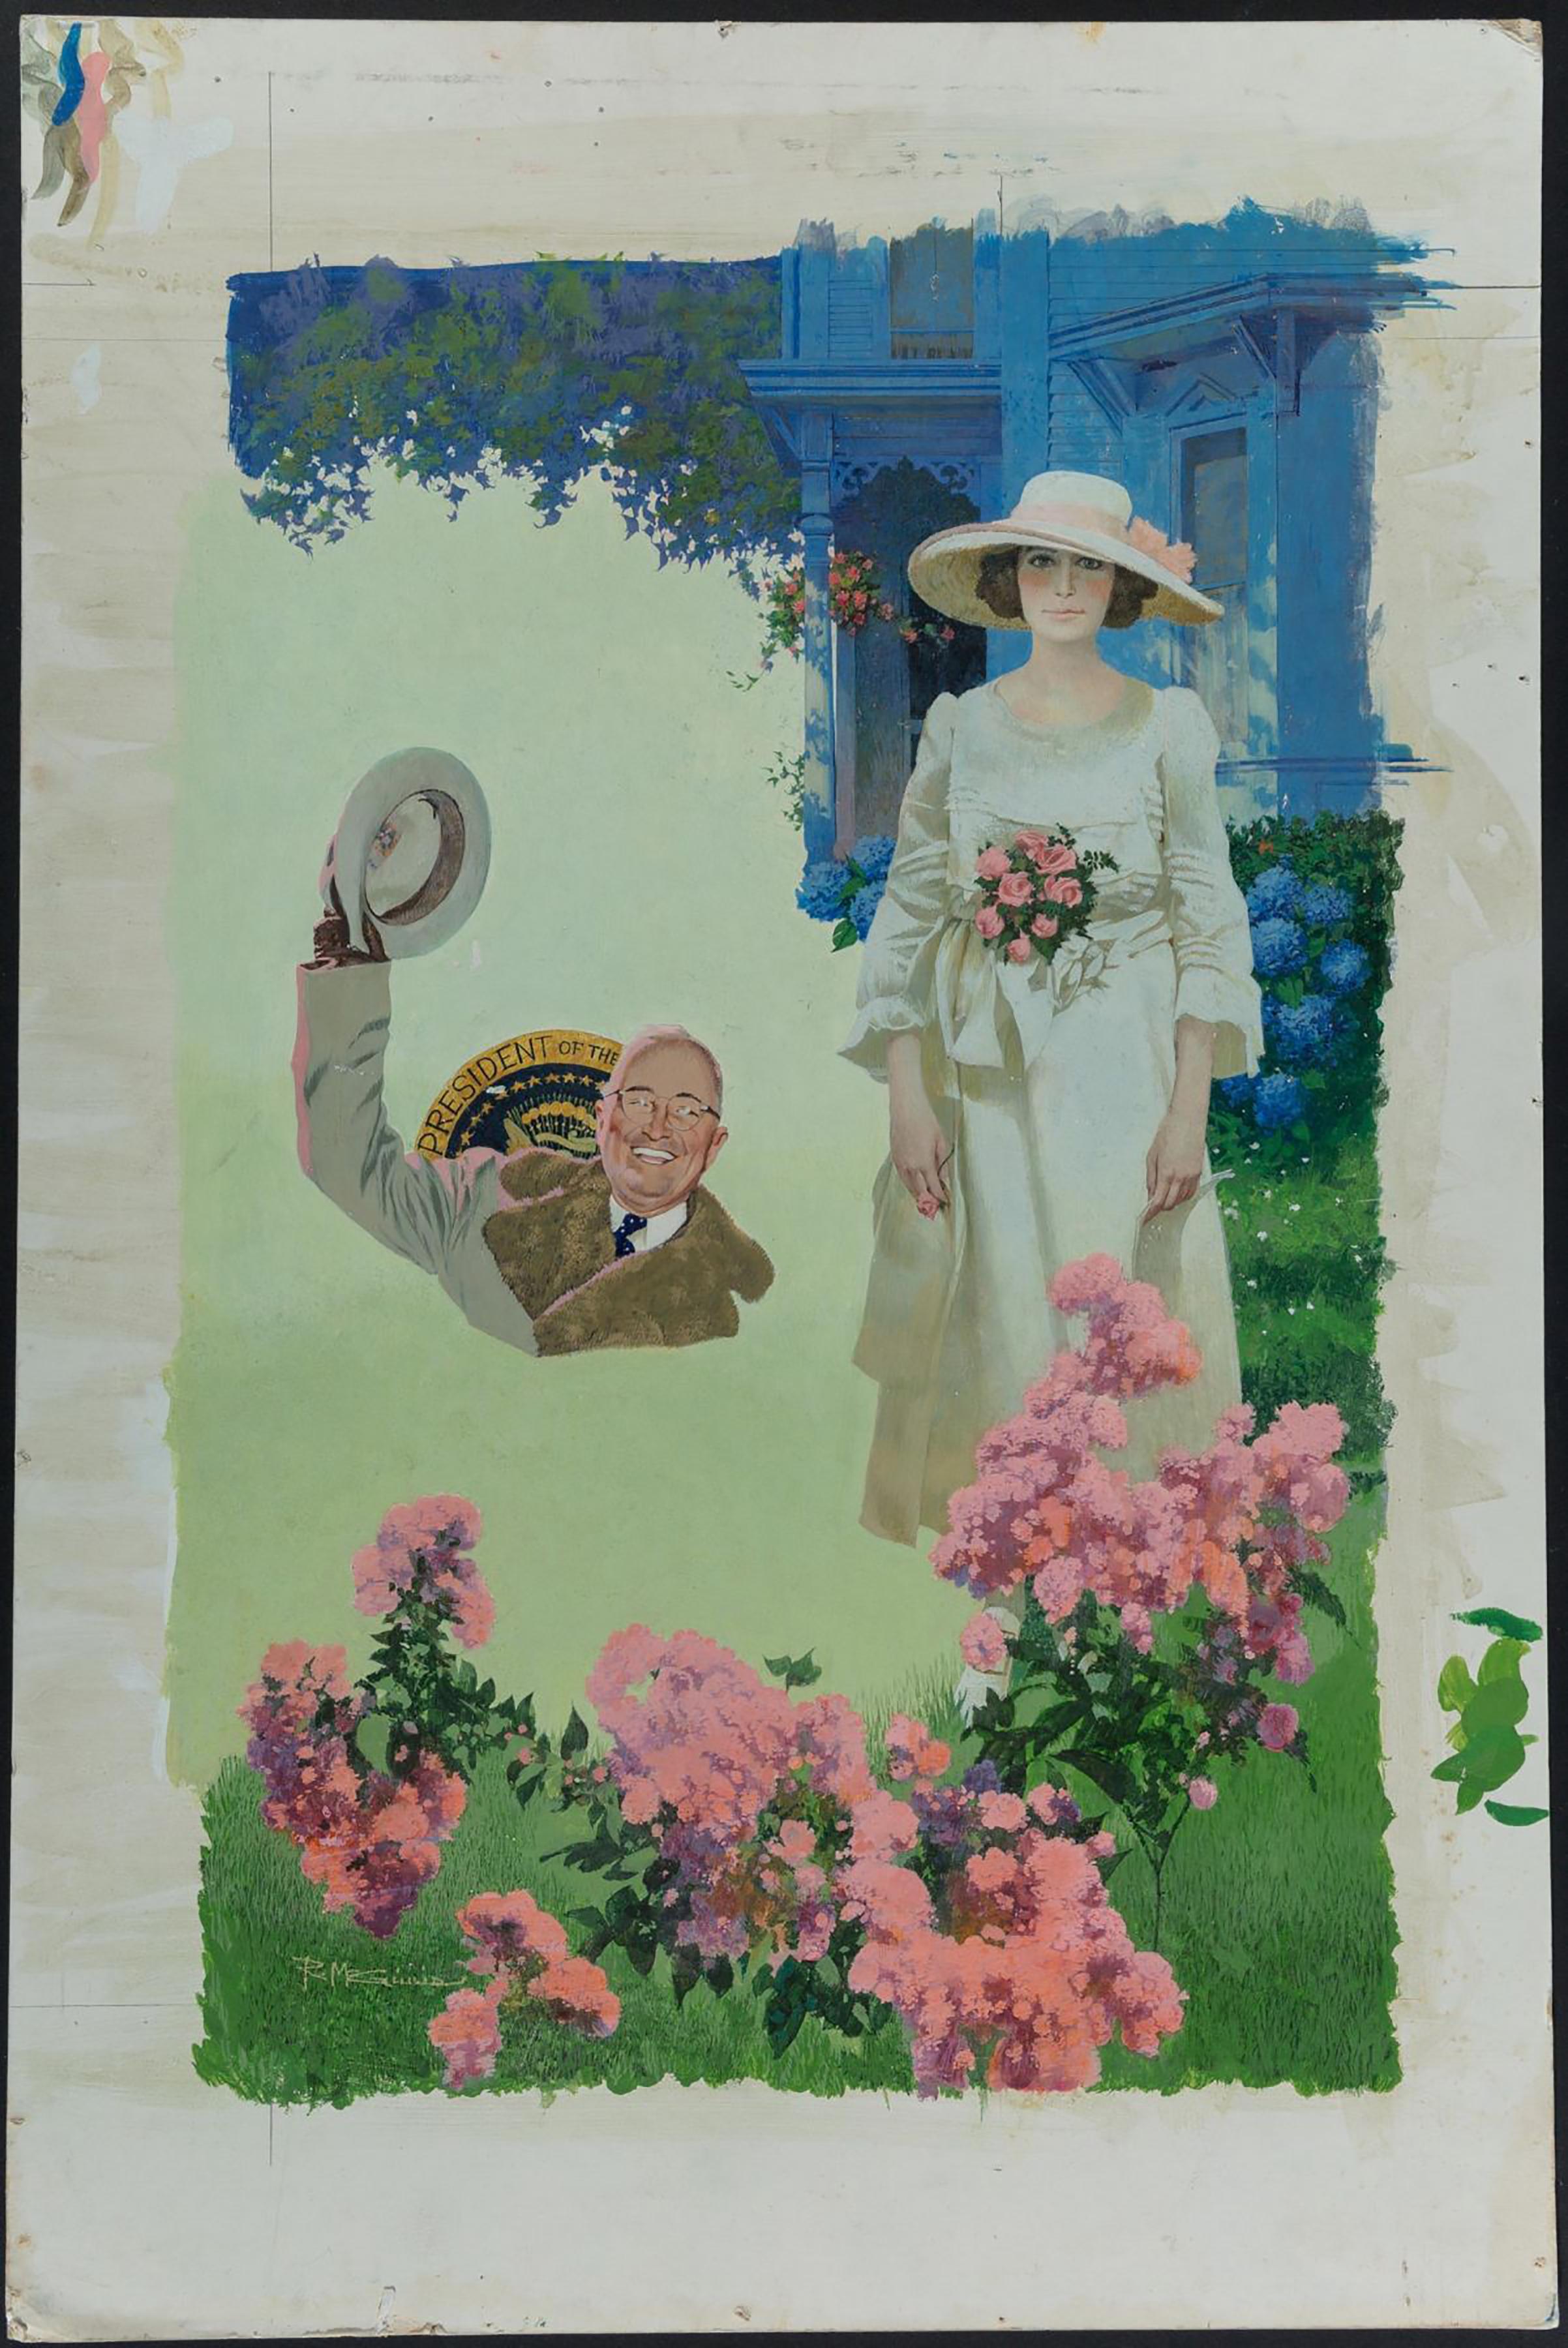 Roosevelt's Rose, Probable Paperback Cover - Painting by Robert E. McGinnis